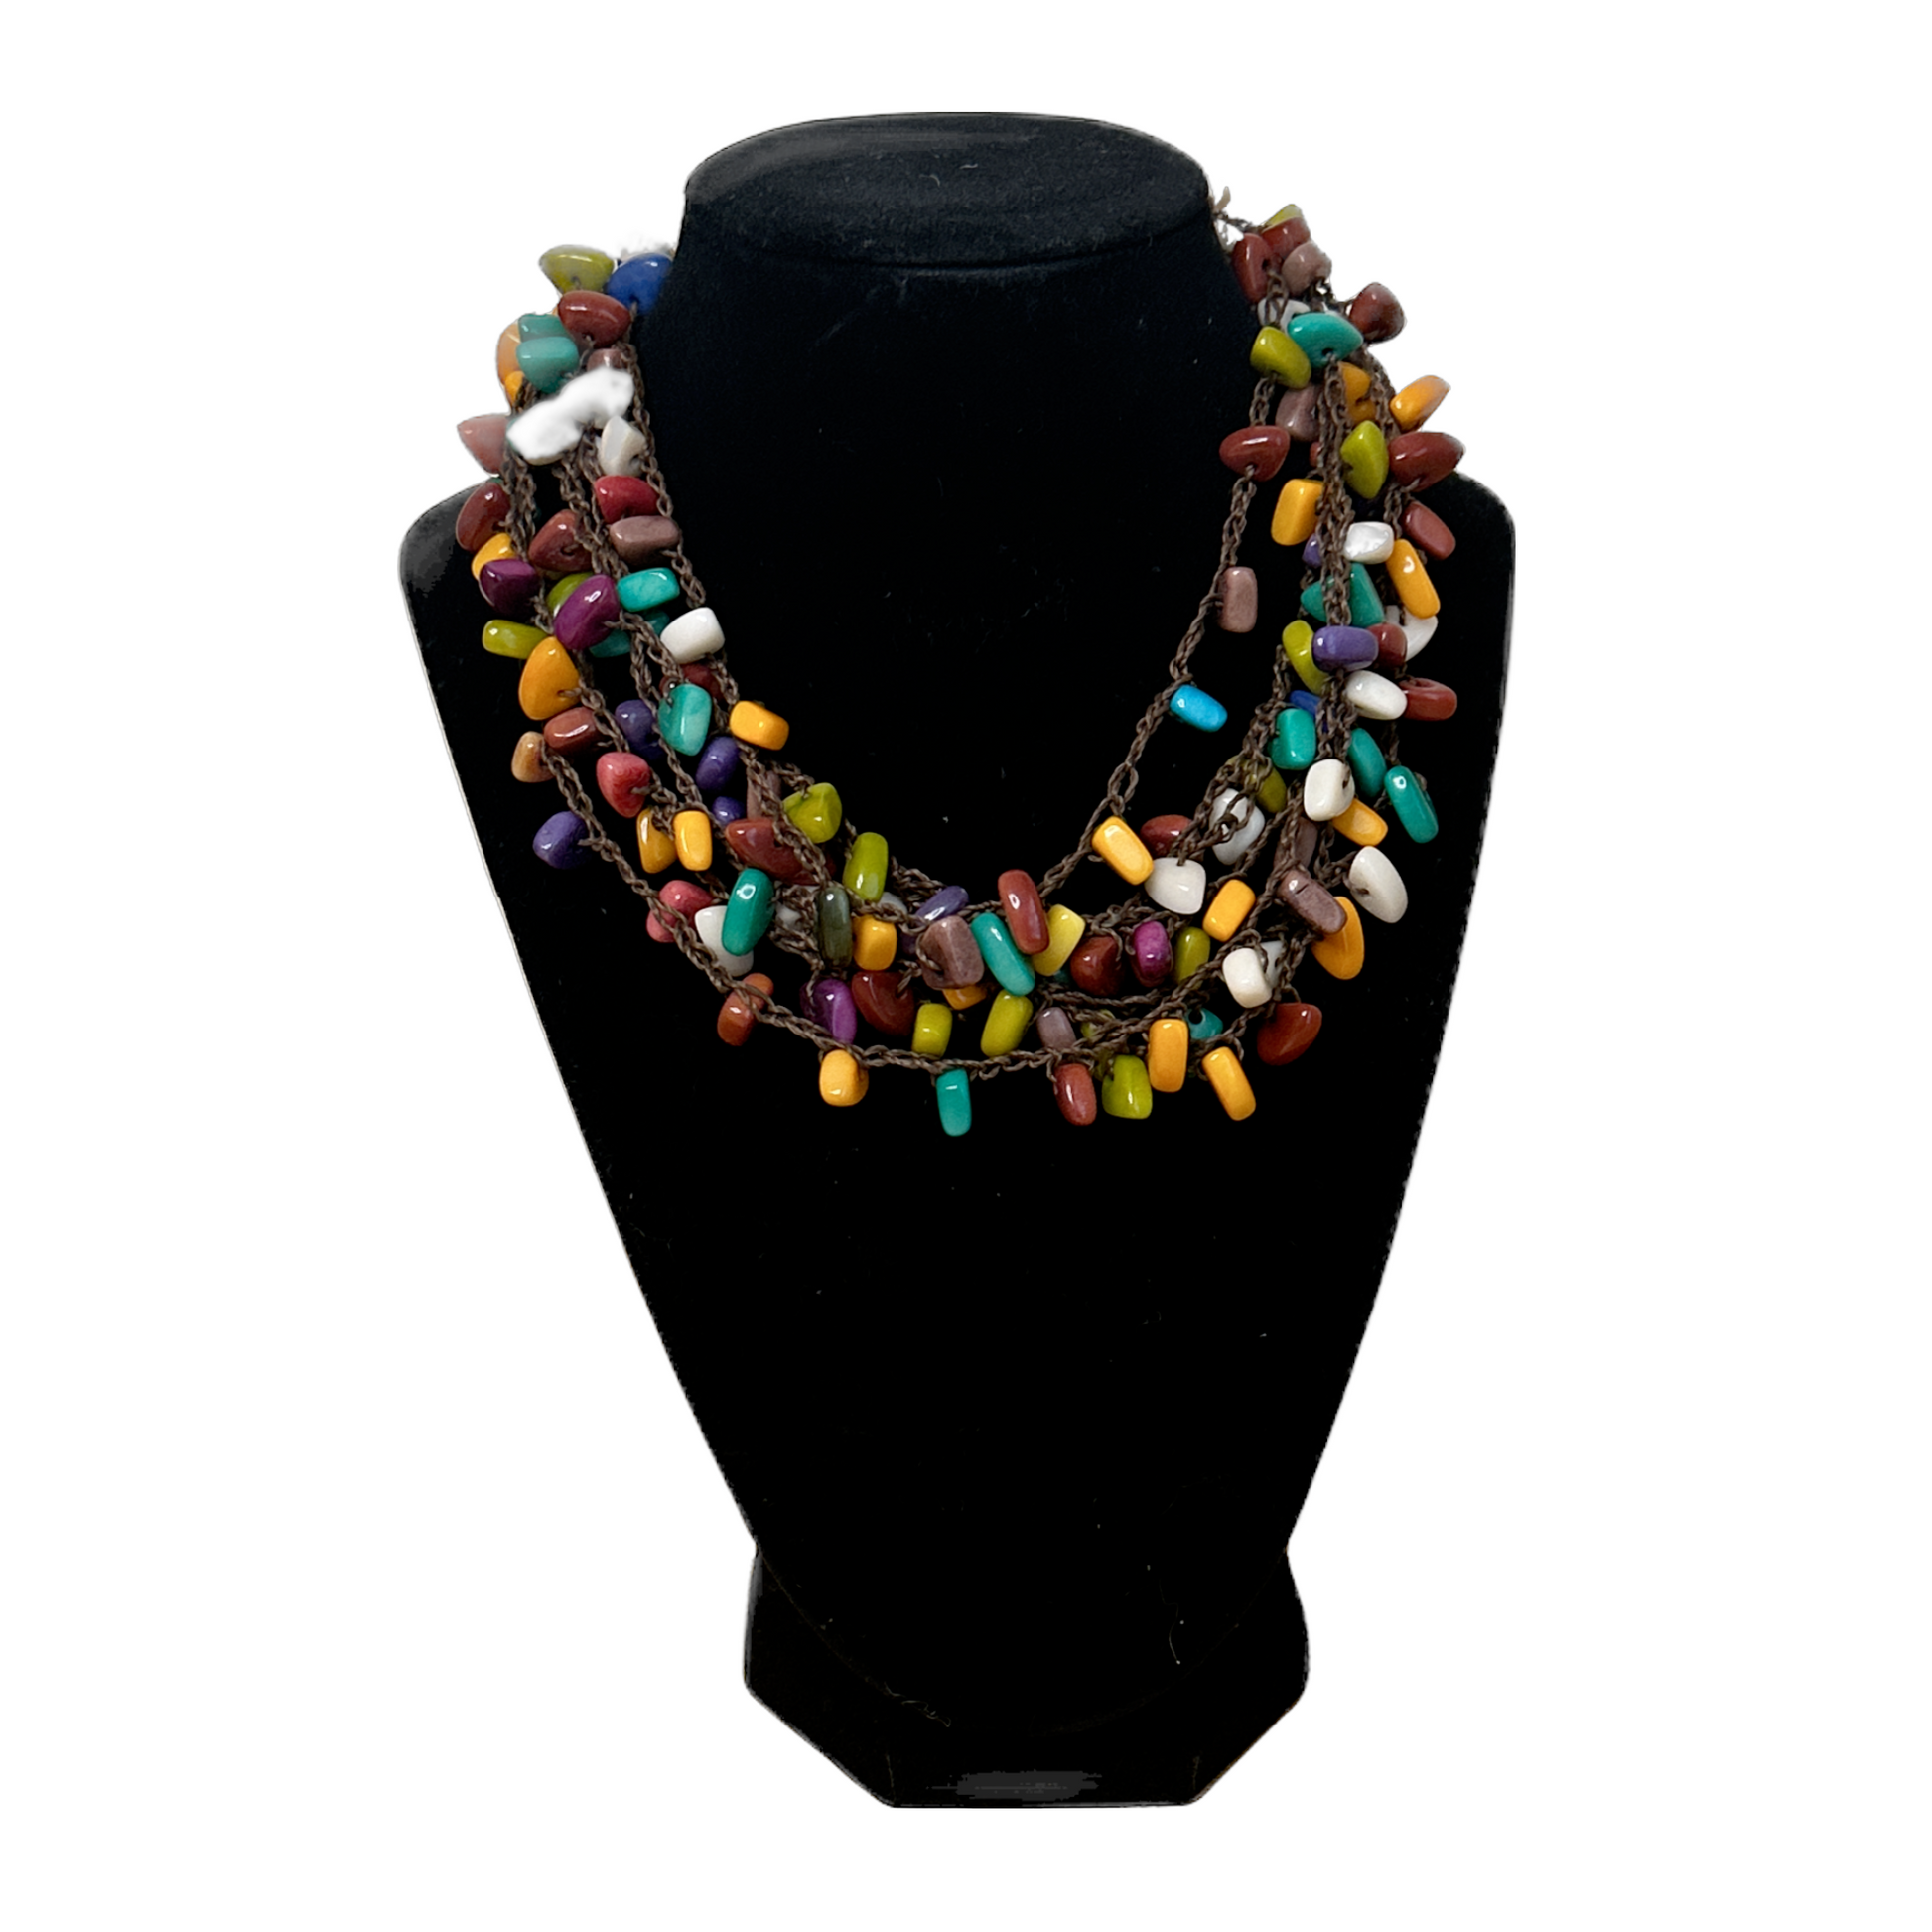 TAGUA NUT NECKLACES The Hip Hat